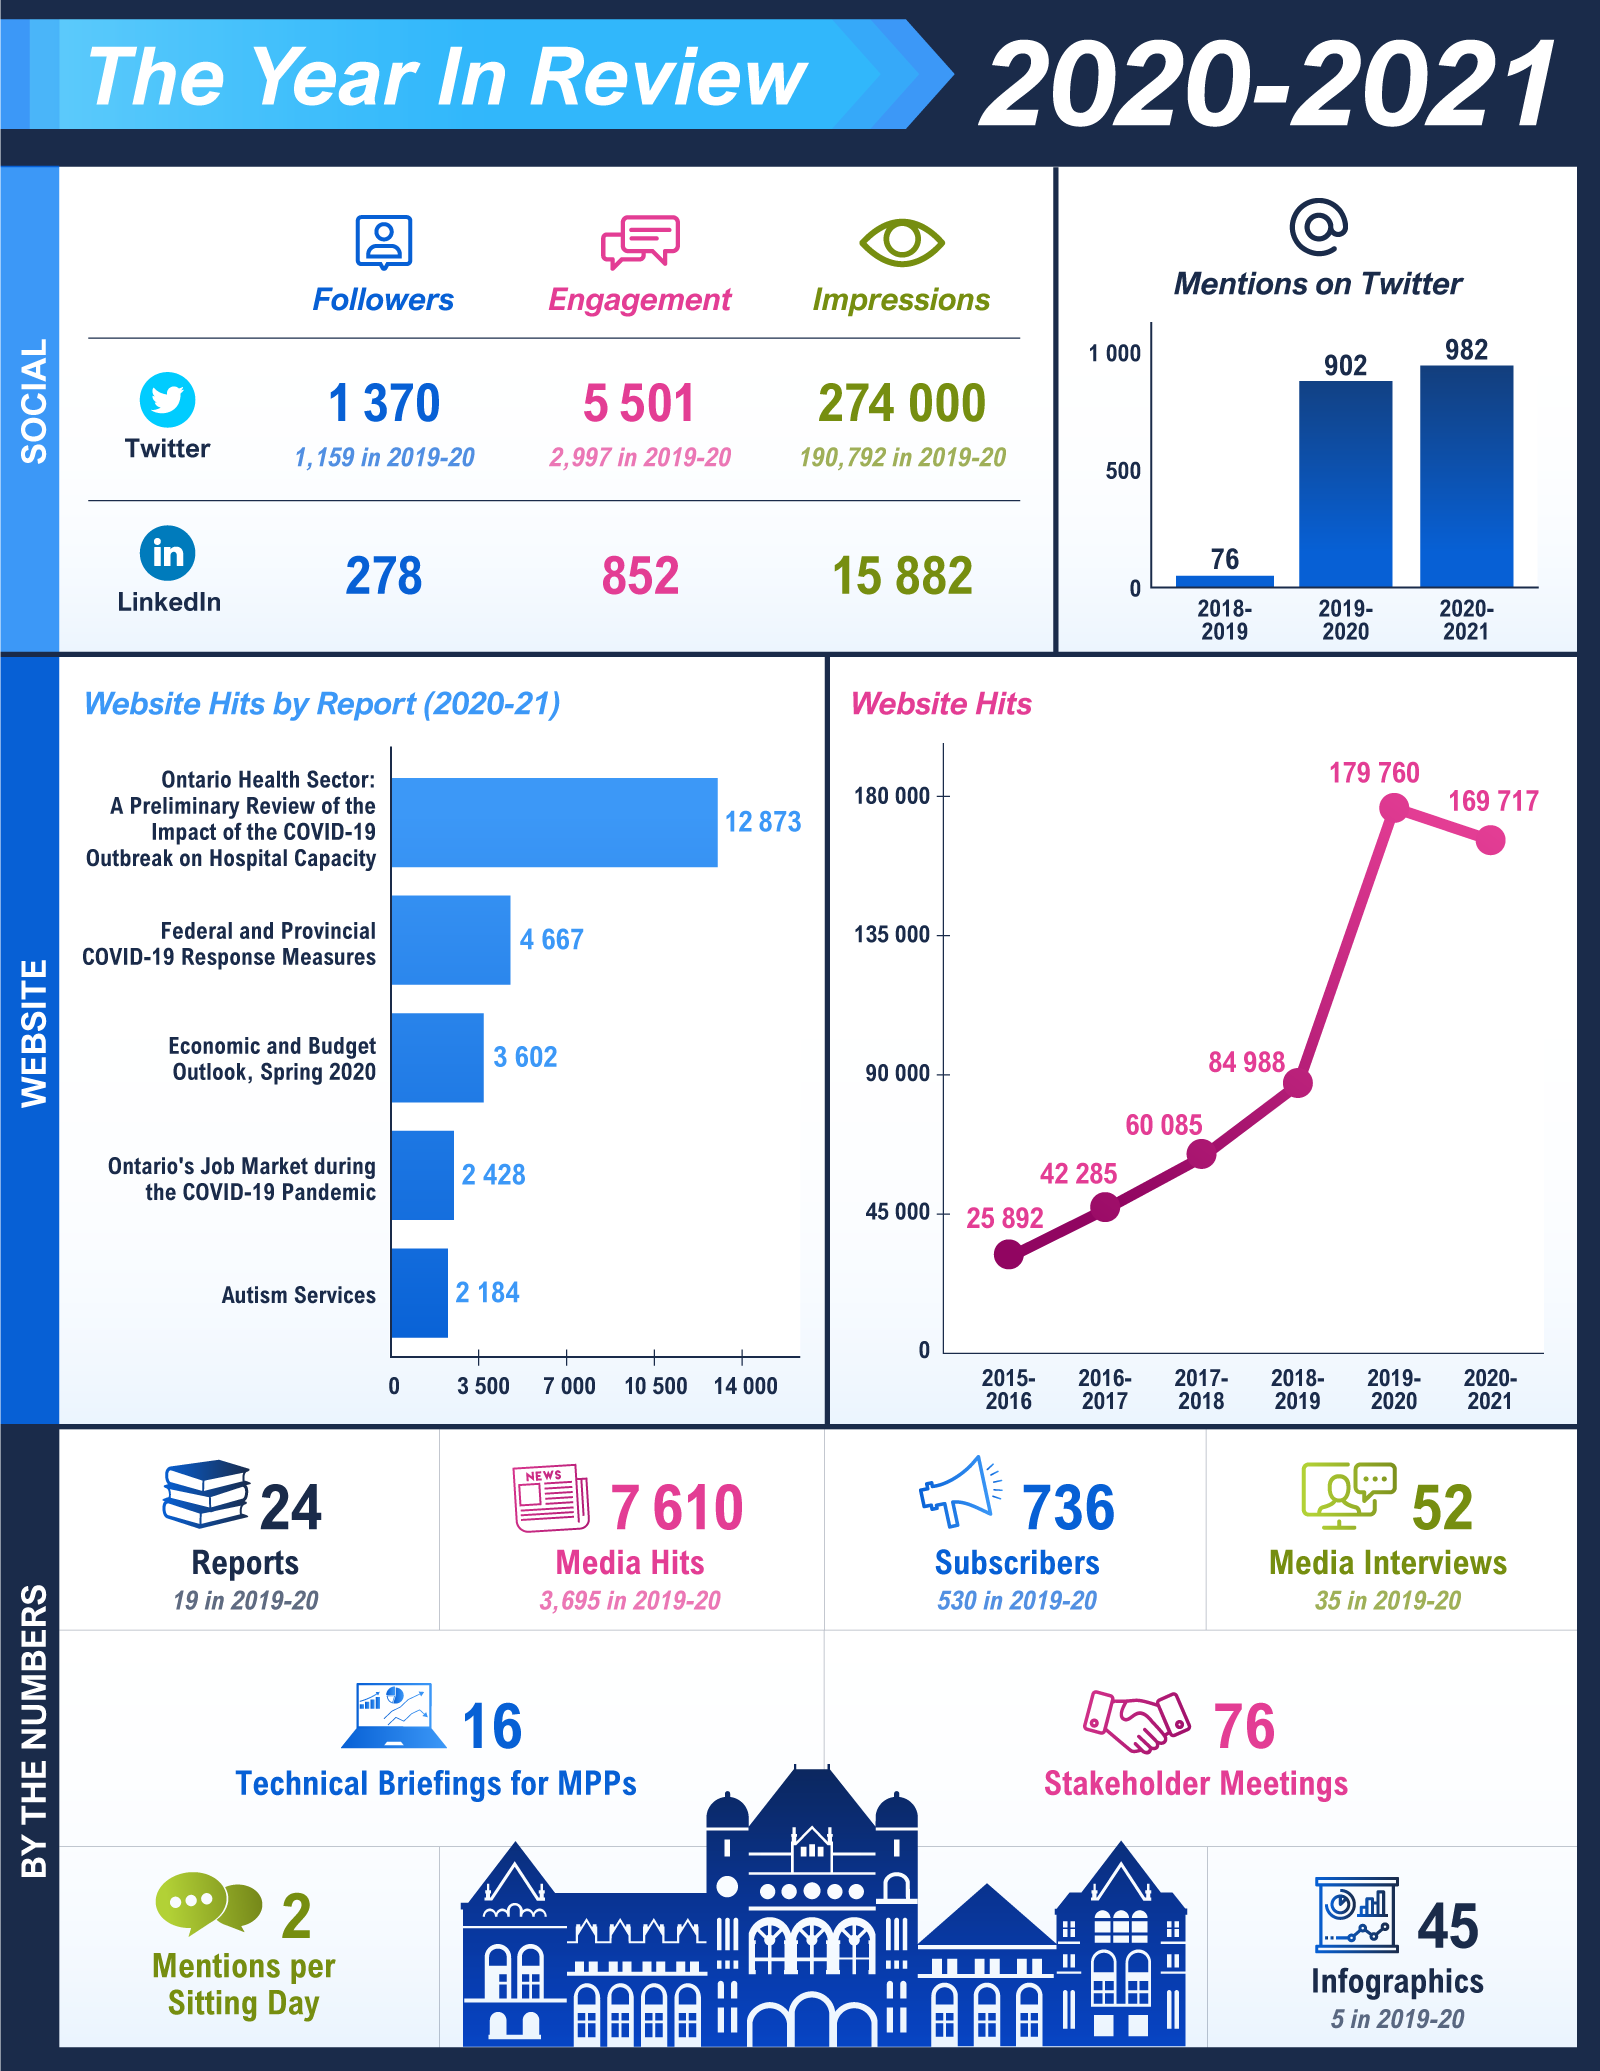 The infographic provides a summary of performance metrics for 2020-21. The FAO produced 24 reports in 2020-21, five more than the previous year. The website had a total of 169,717 views, approximately 6% less than 2019-20. The top five most viewed reports were (starting with the top viewed): 1) <em>Ontario Health Sector: A Preliminary Review of the Impact of the COVID-19 Outbreak on Hospital Capacity </em>with 12,873 hits<em>; </em>2) <em>Federal and Provincial COVID-19 Response Measures </em>with 4,667 hits<em>; </em>3) <em>Economic and Budget Outlook, Spring 2020 </em>with 3,602 hits<em>; </em>4) <em>Ontario’s Job Market During the COVID-19 Pandemic </em>with 2,428 hits<em>; </em>and5) <em>Autism Services </em>with 2,184 hits<em>. </em>In the media, the FAO was featured 7,610 times in 2020-21 compared to 3,695 hits in 2019-20. Our email subscribers grew to 736, up from 530. The FAO held 16 technical briefings for MPPs and 76 stakeholder meetings. On average, the FAO was mentioned twice per sitting day at the legislature. Financial Accountability Officer, Peter Weltman, partook in 52 media interviews in 2020-21, 17 more than in 2019-20. The FAO created 45 infographics in 2020-21 compared to 5 in 2019-20. On Twitter, the FAO was mentioned 982 times in 2020-21 compared to 902 times in 2019-20. Twitter followers increased to 1,370 from 1,159. Twitter engagements increased to 5,501 from 2,997 and impressions increased to 274,000 from 190,792. On LinkedIn, the FAO’s followership stood at 278 at the end of 2020-21, it had received 852 engagements, and it had 15,882 impressions.